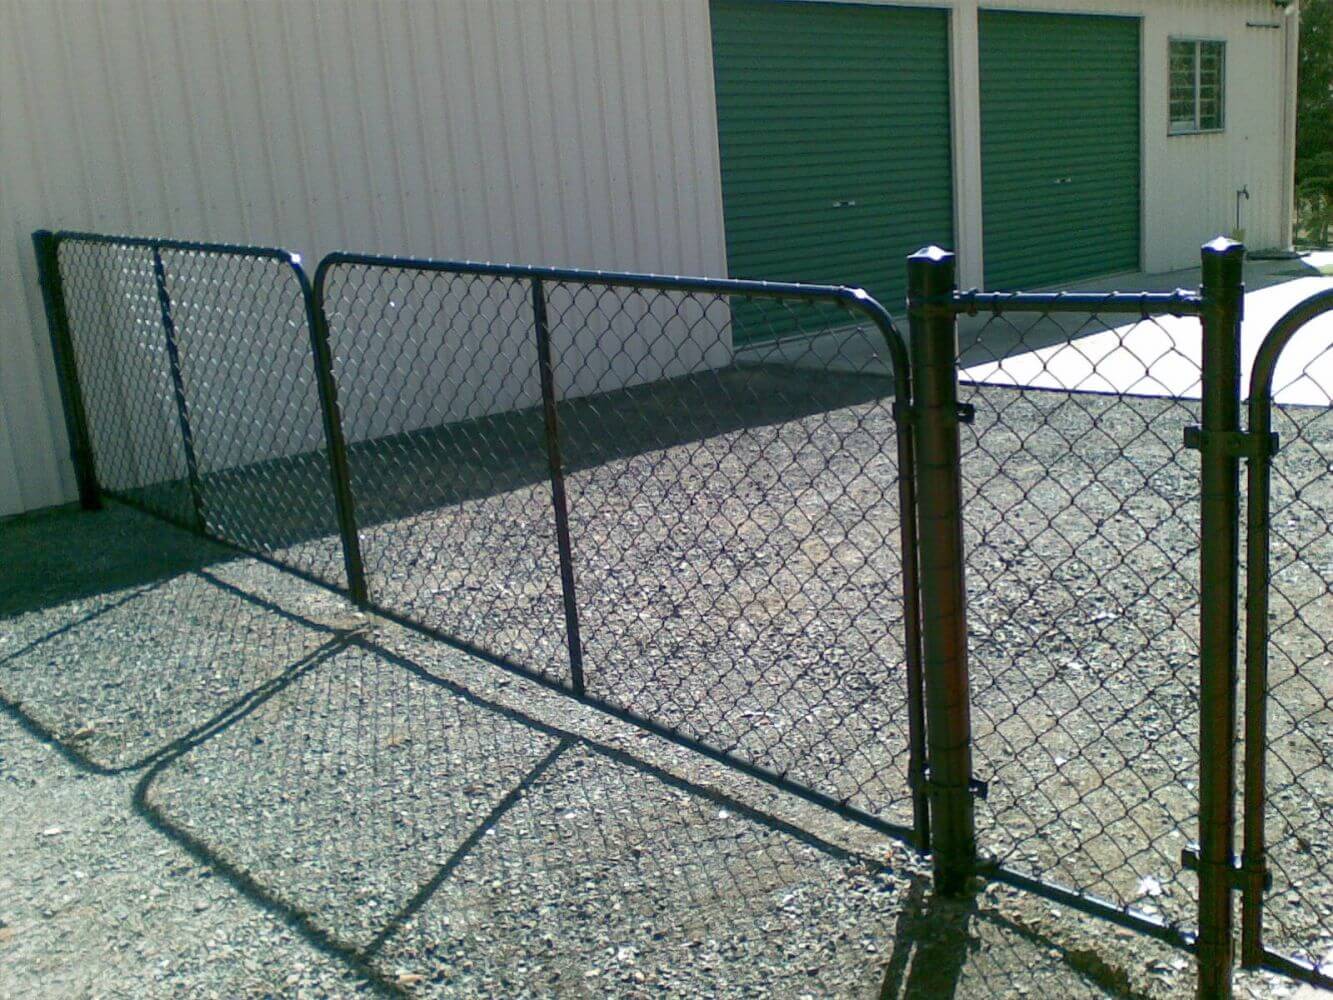 "Industrial Fence: Heavy-Duty Protection for Commercial Needs"